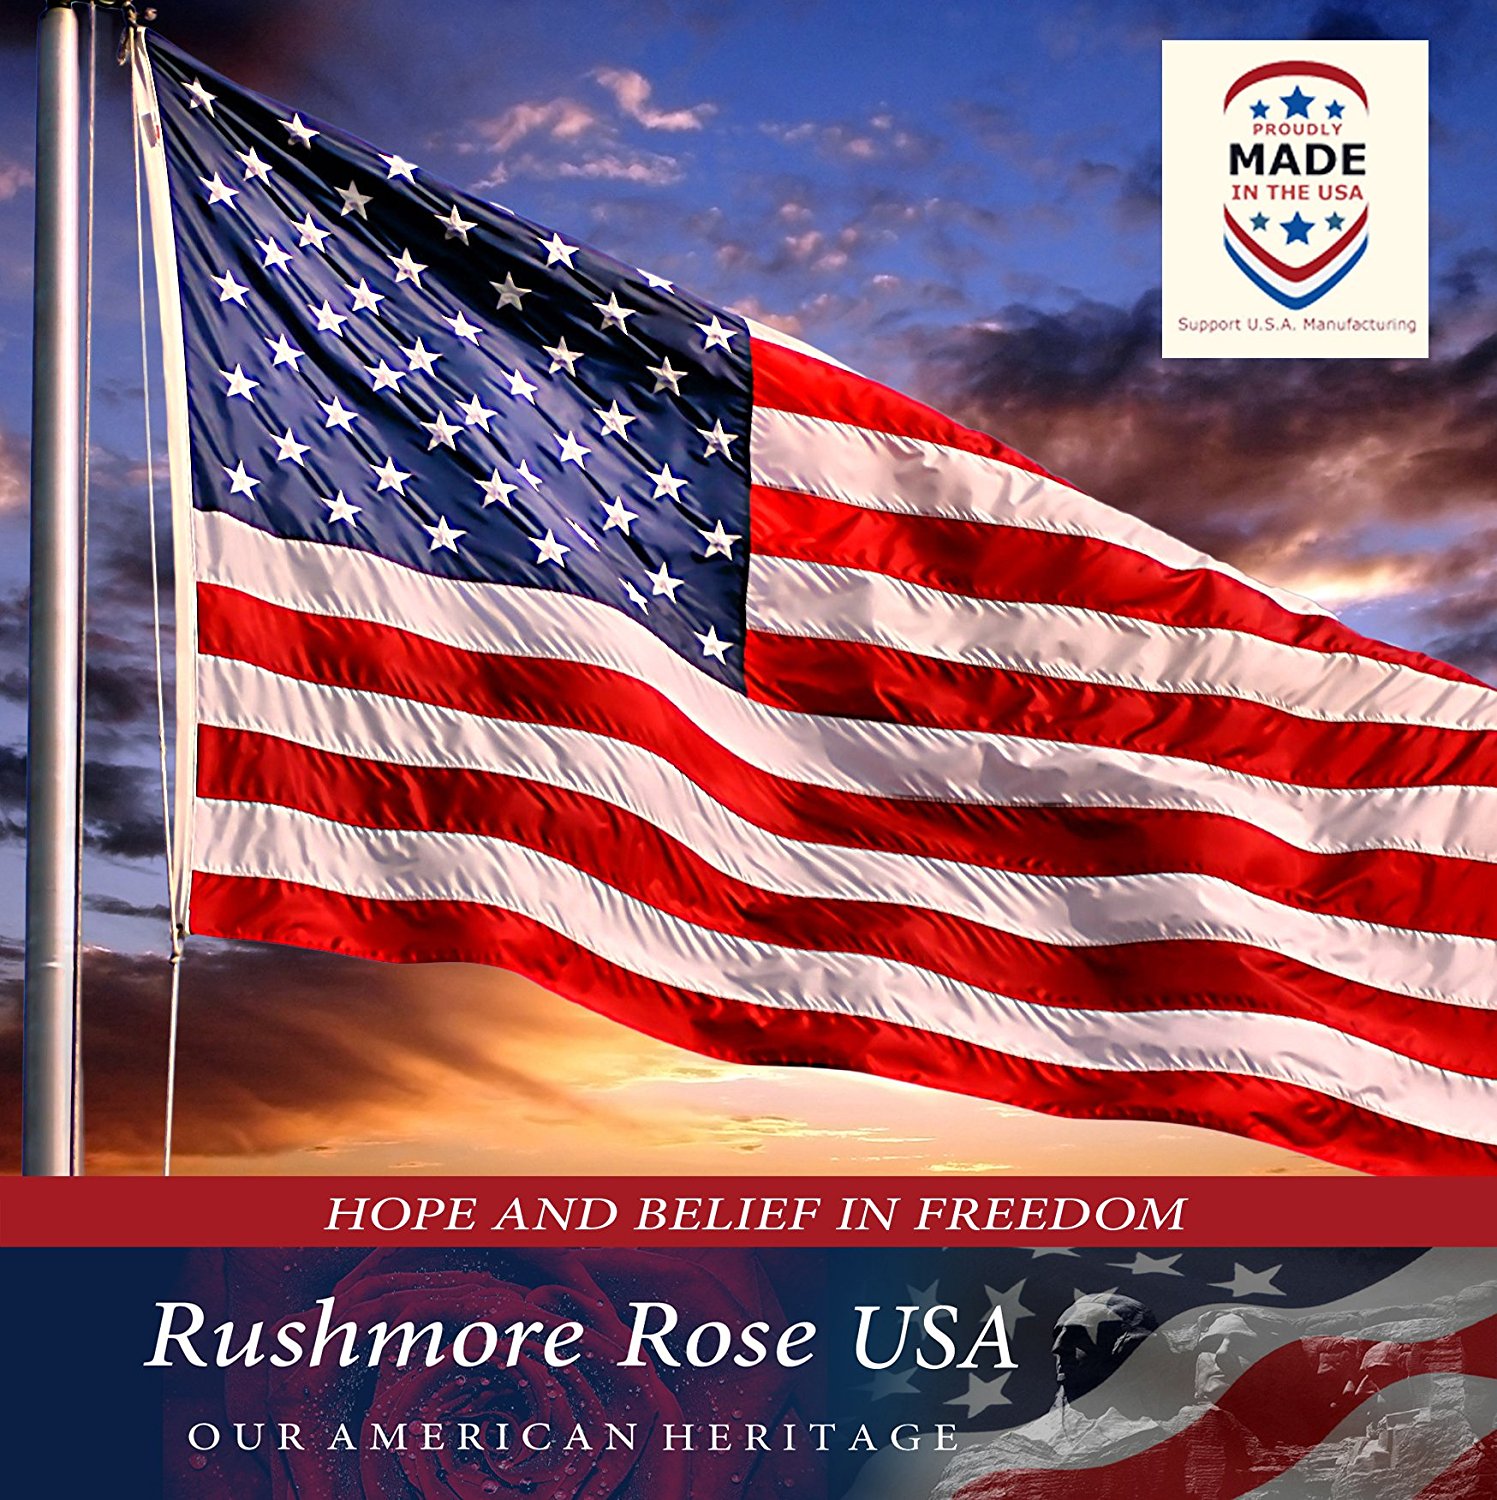 Amazon.com : Rushmore Rose USA American Flag - US Flag 3x5 - Made in ...